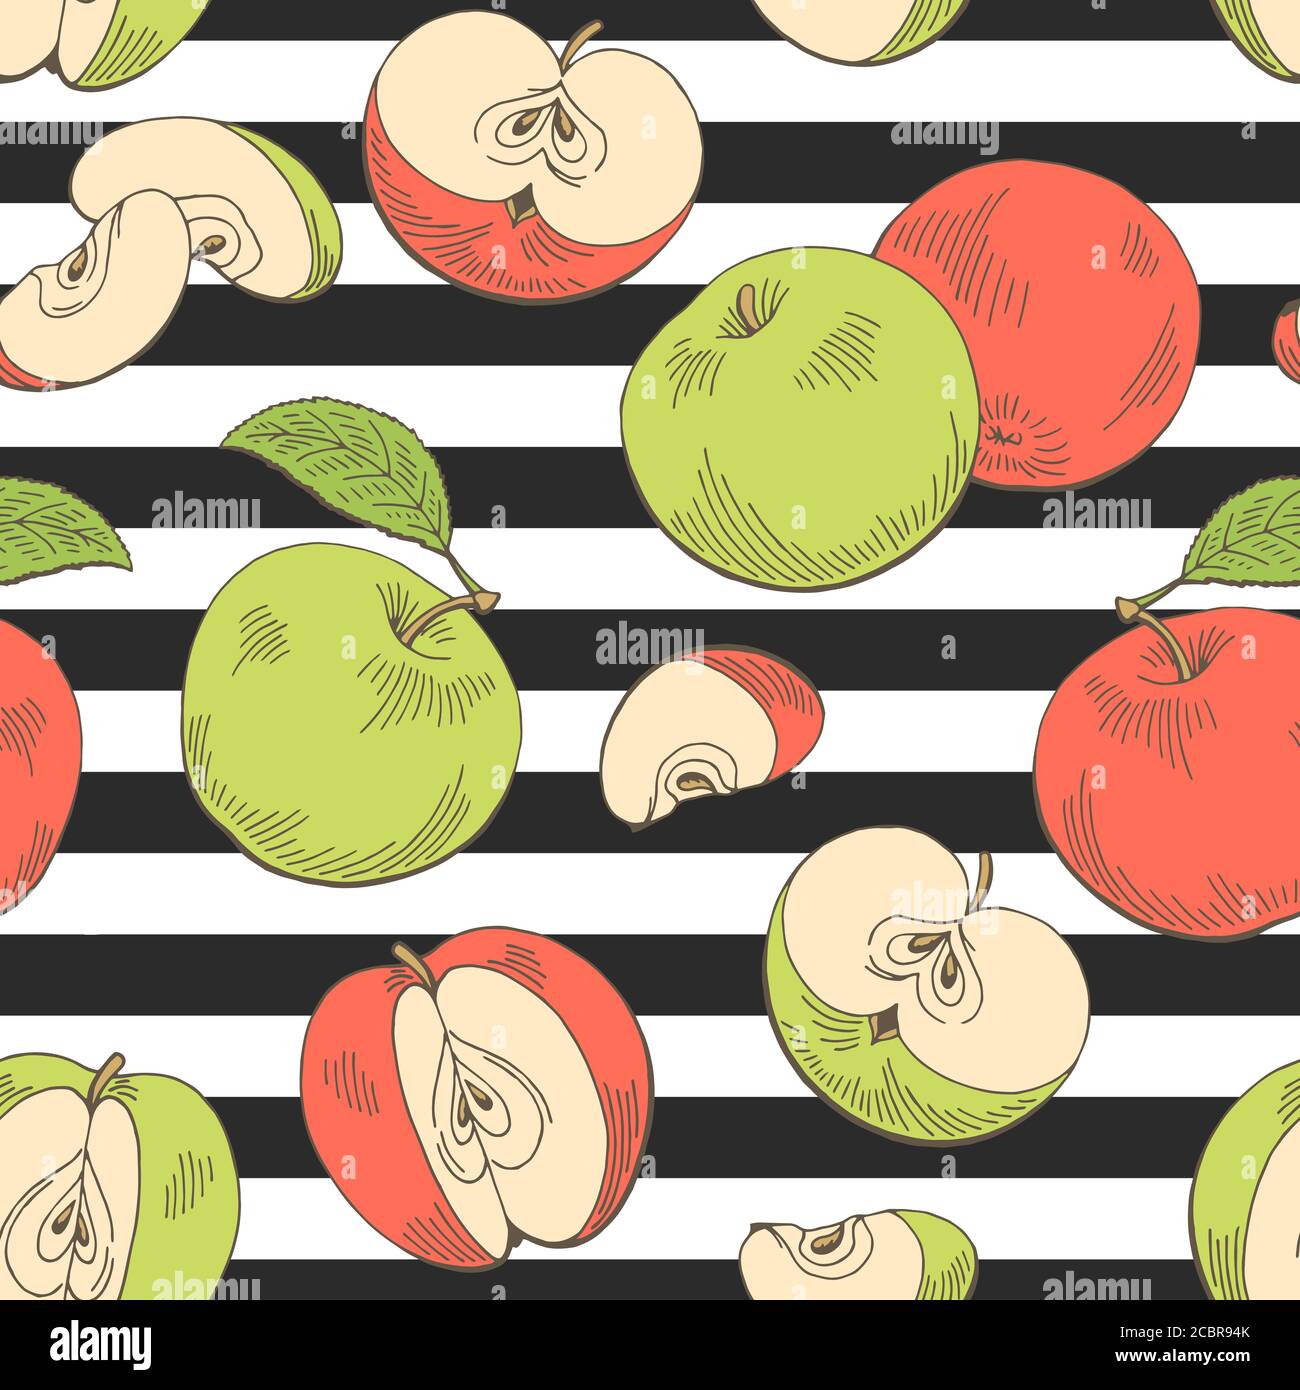 Apple fruit graphic red green color seamless pattern background sketch illustration vector Stock Vector